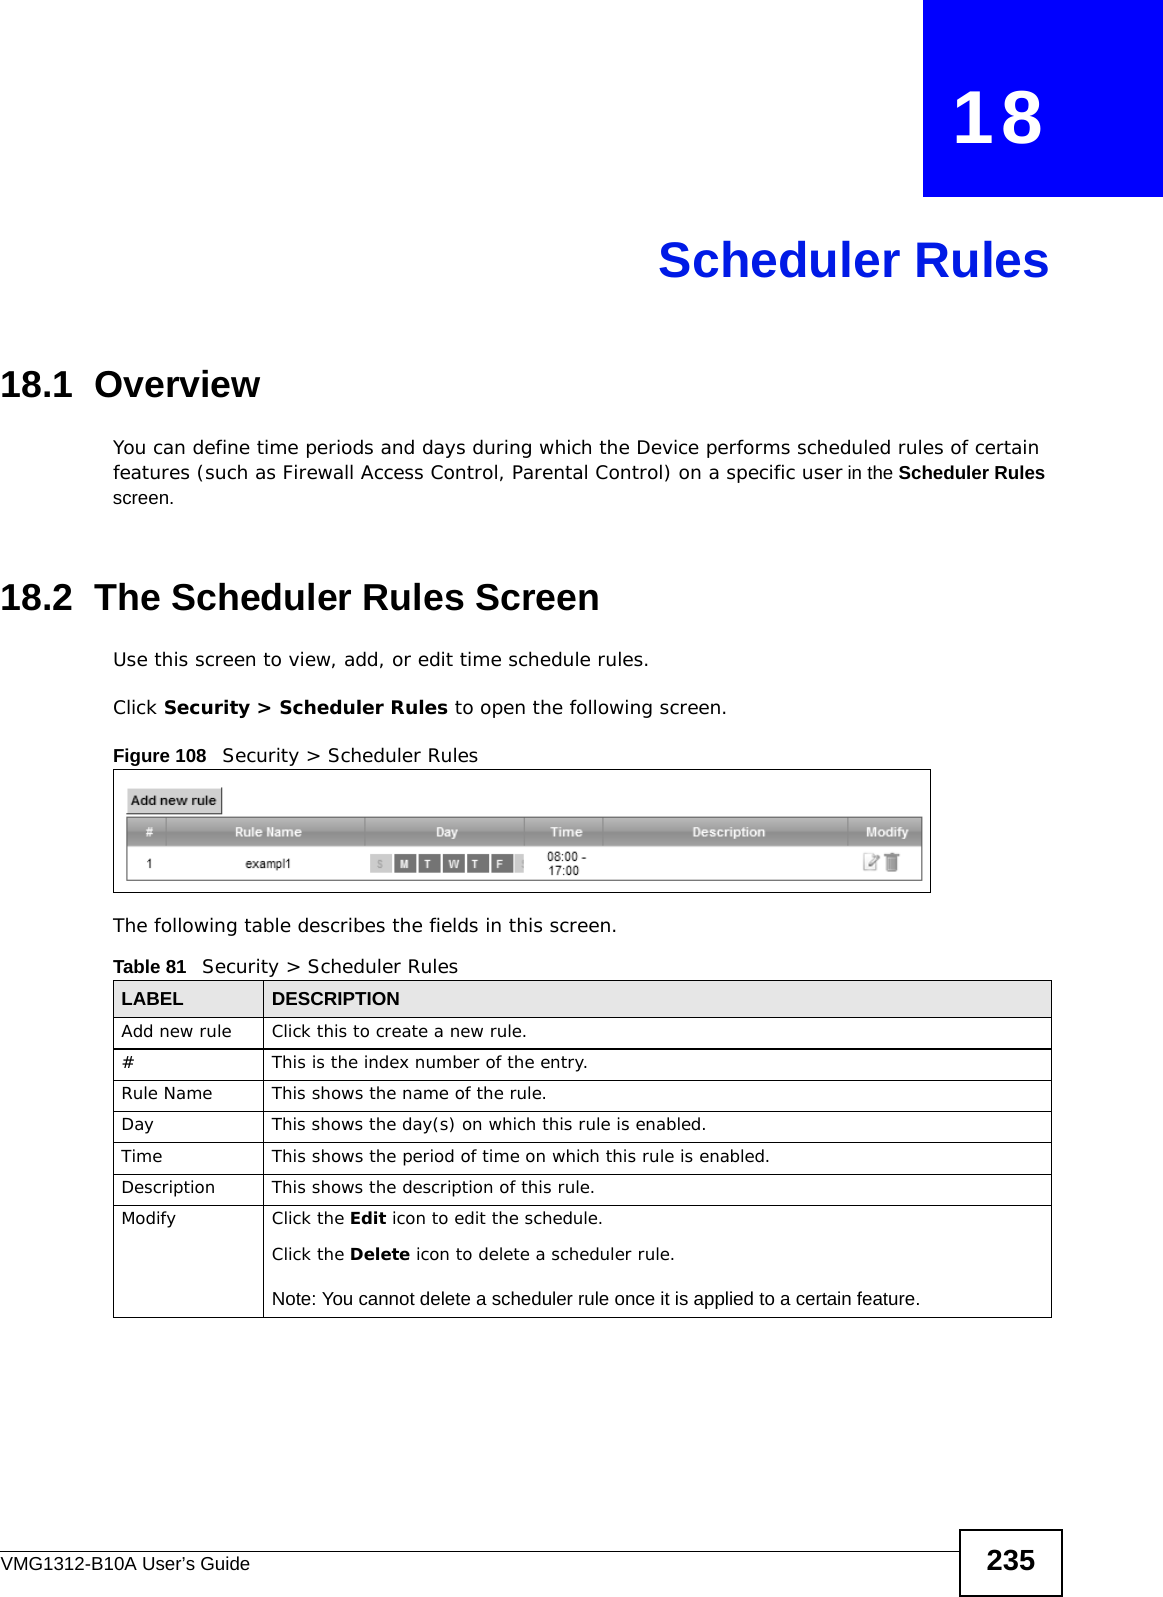 VMG1312-B10A User’s Guide 235CHAPTER   18Scheduler Rules18.1  OverviewYou can define time periods and days during which the Device performs scheduled rules of certain features (such as Firewall Access Control, Parental Control) on a specific user in the Scheduler Rules screen. 18.2  The Scheduler Rules ScreenUse this screen to view, add, or edit time schedule rules.Click Security &gt; Scheduler Rules to open the following screen. Figure 108   Security &gt; Scheduler Rules The following table describes the fields in this screen. Table 81   Security &gt; Scheduler RulesLABEL DESCRIPTIONAdd new rule Click this to create a new rule.#This is the index number of the entry.Rule Name This shows the name of the rule.Day This shows the day(s) on which this rule is enabled.Time This shows the period of time on which this rule is enabled.Description This shows the description of this rule.Modify Click the Edit icon to edit the schedule.Click the Delete icon to delete a scheduler rule.Note: You cannot delete a scheduler rule once it is applied to a certain feature.